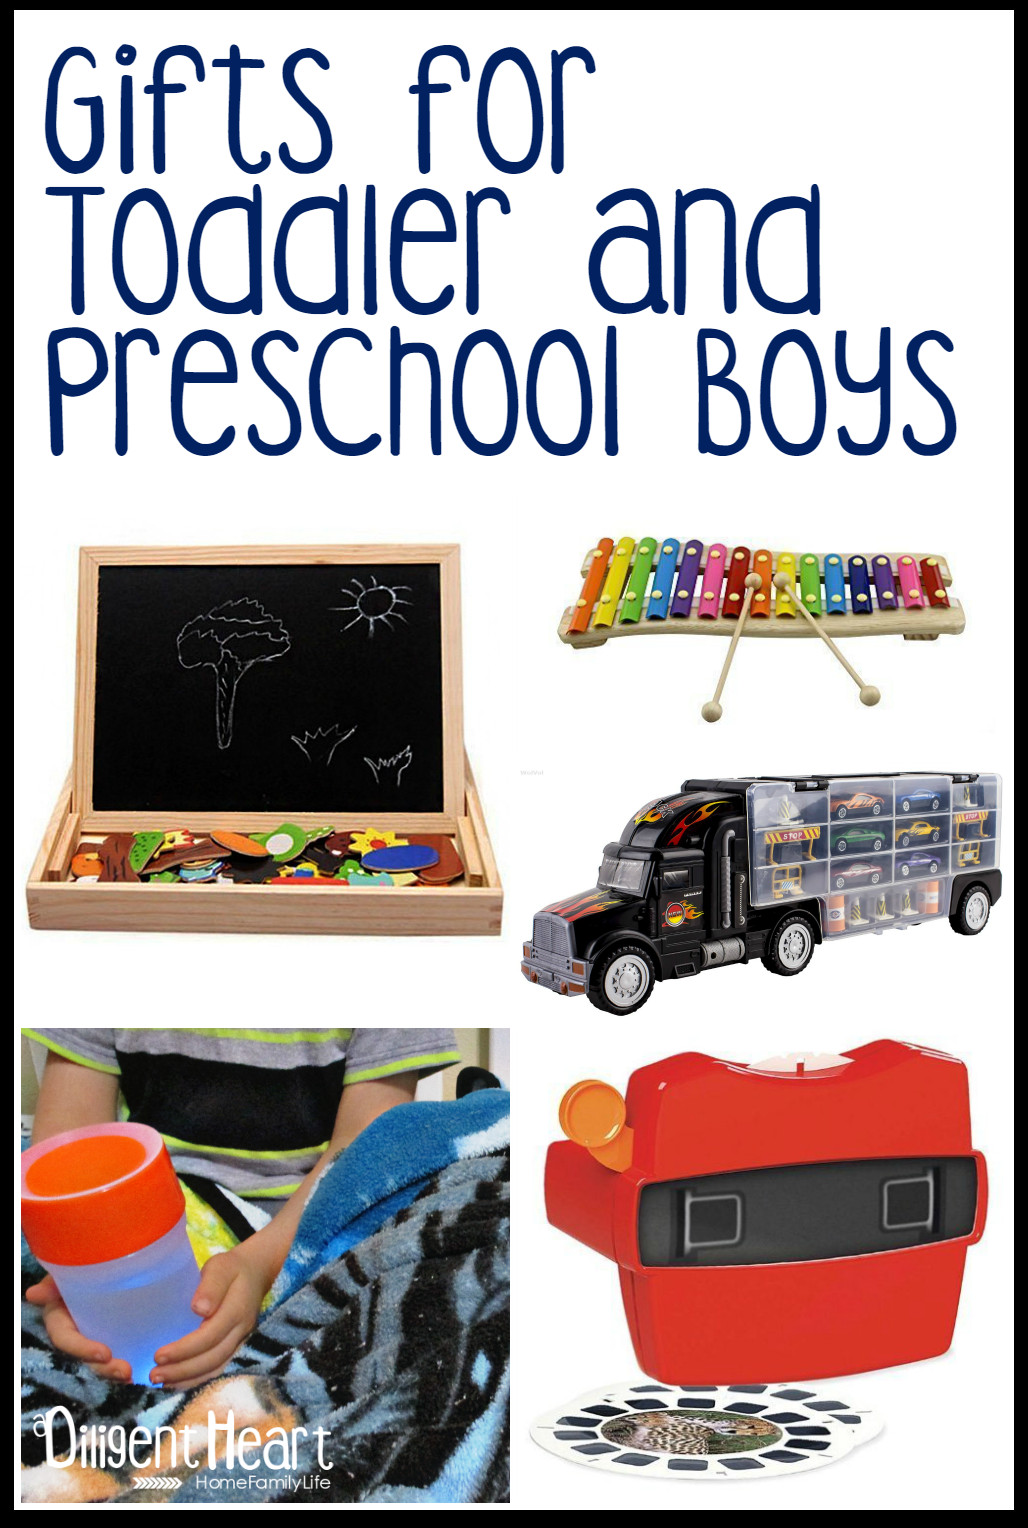 Toddler Gift Ideas For Boys
 Gifts For Toddler and Preschool Boys